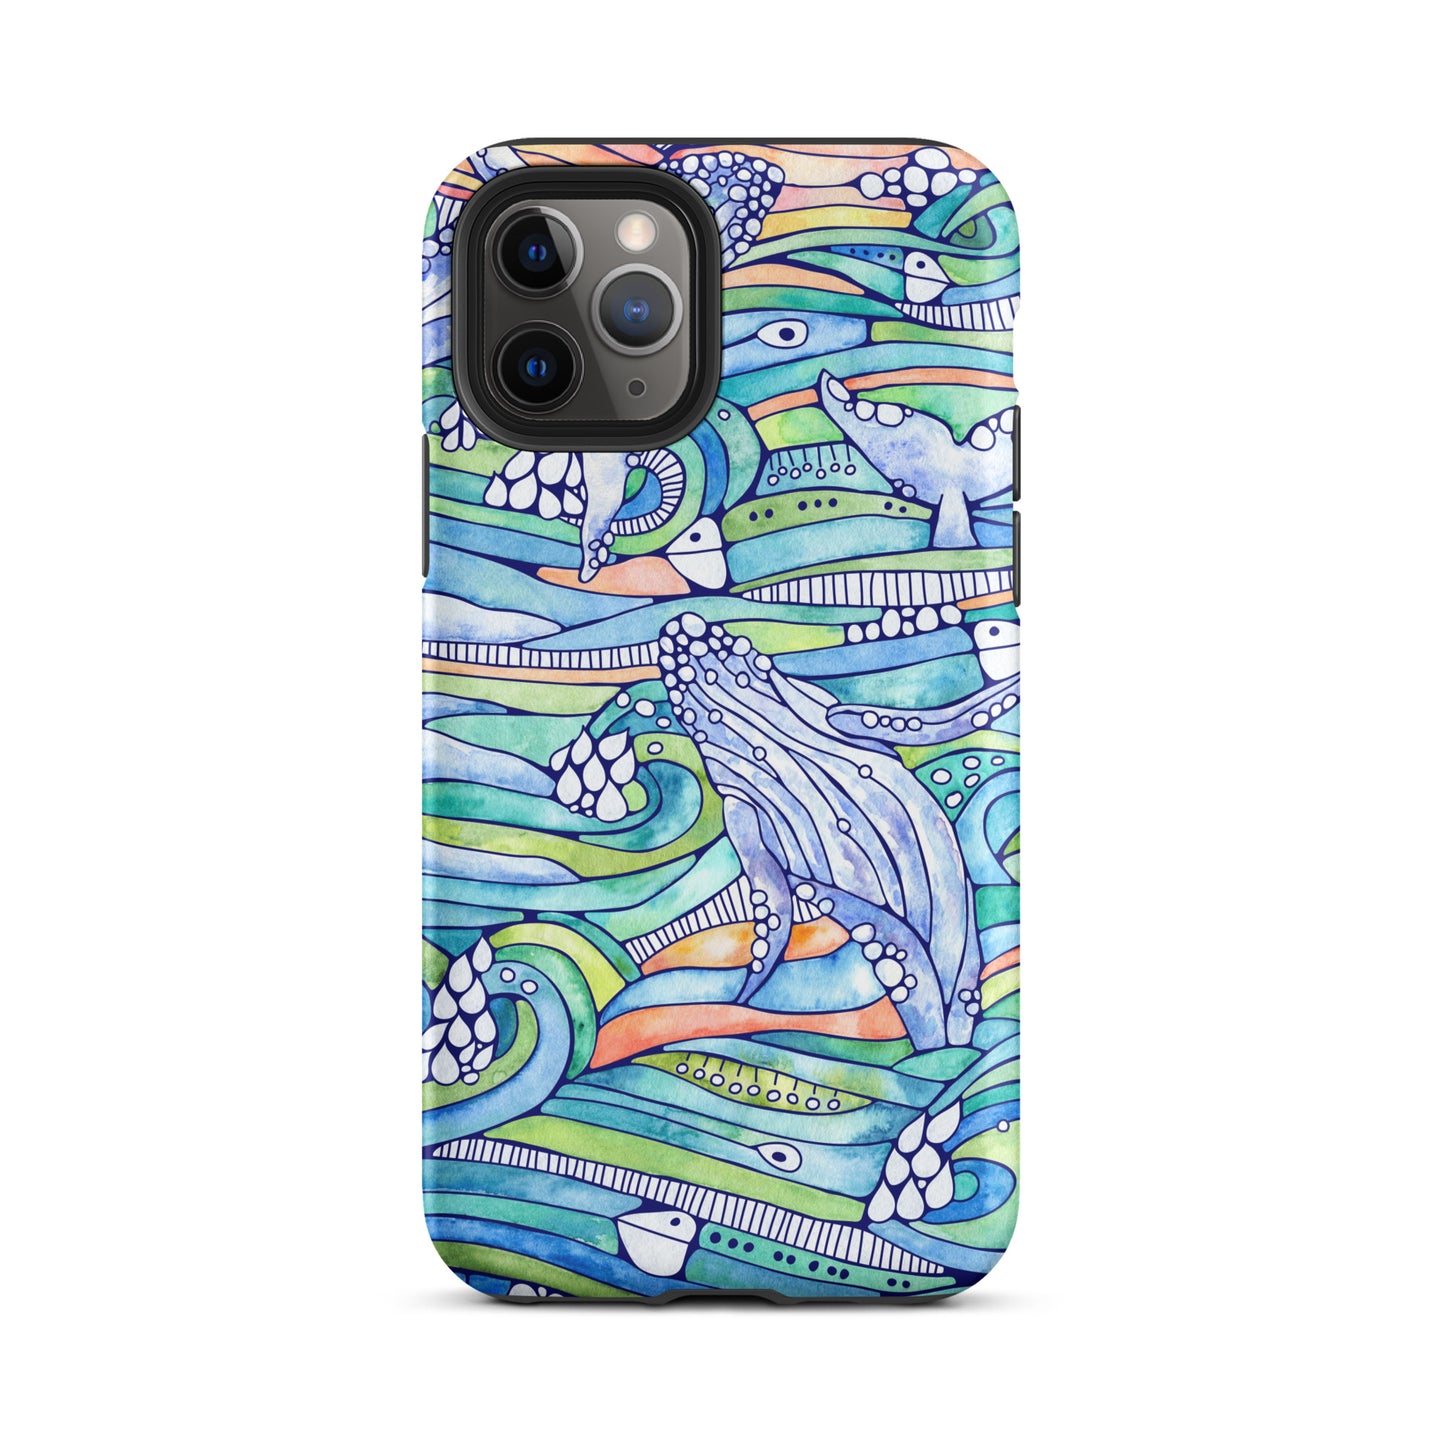 In The Bay- Tough iPhone Case